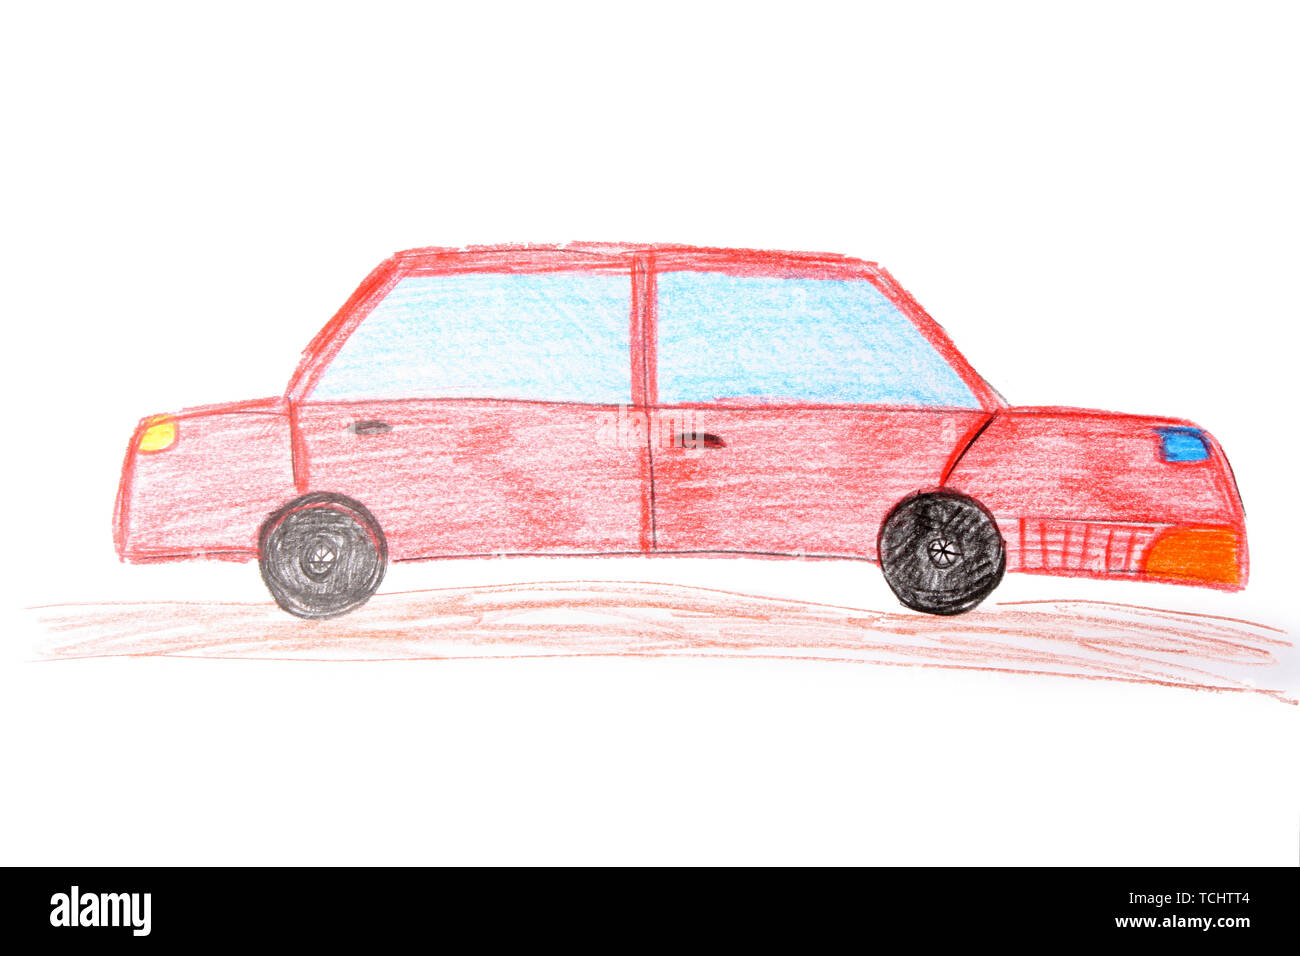 Child's Drawing Of Red Car Stock Photo, Picture and Royalty Free Image.  Image 111091095.